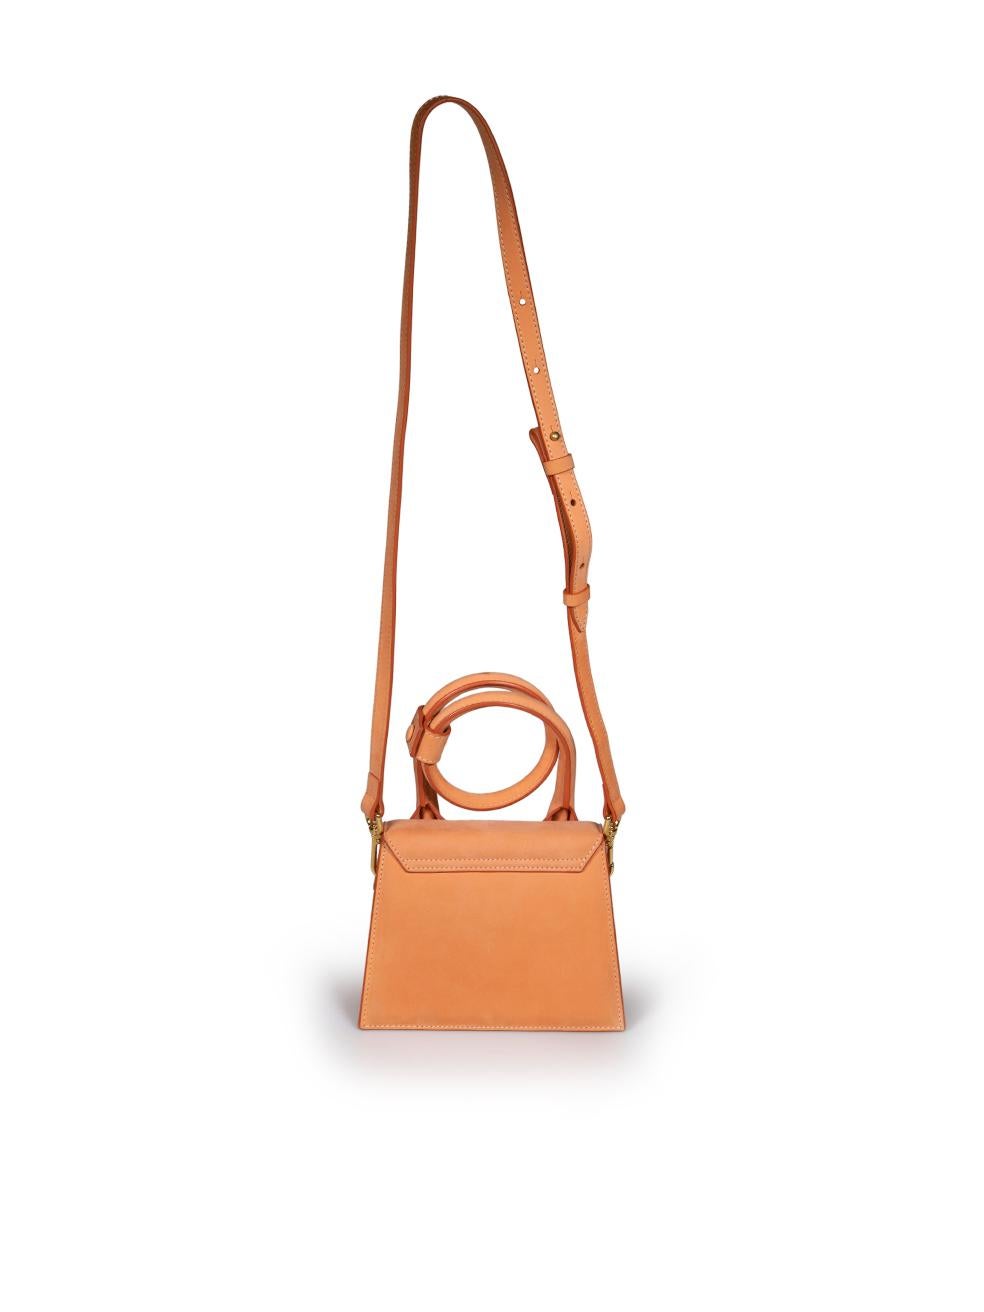 Jacquemus Orange Leather Le Chiquito Noeud Top Handle Bag In Excellent Condition For Sale In London, GB